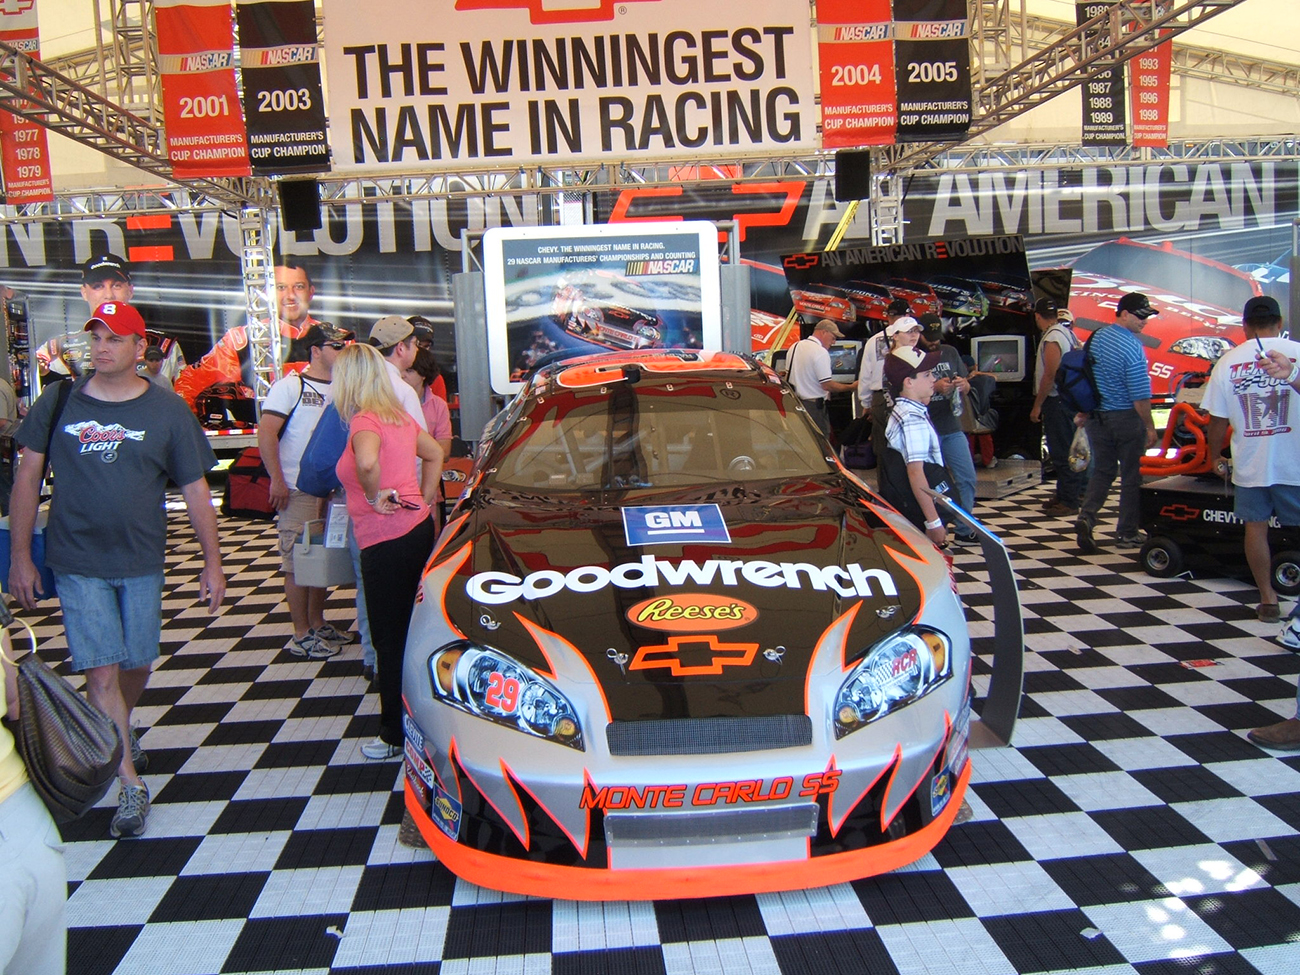 A photograph shows a group of people walking around a Nascar display area. There is a large Chevy racecar parked inside, covered in decals such as G M, Reese's candy, and Good wrench.